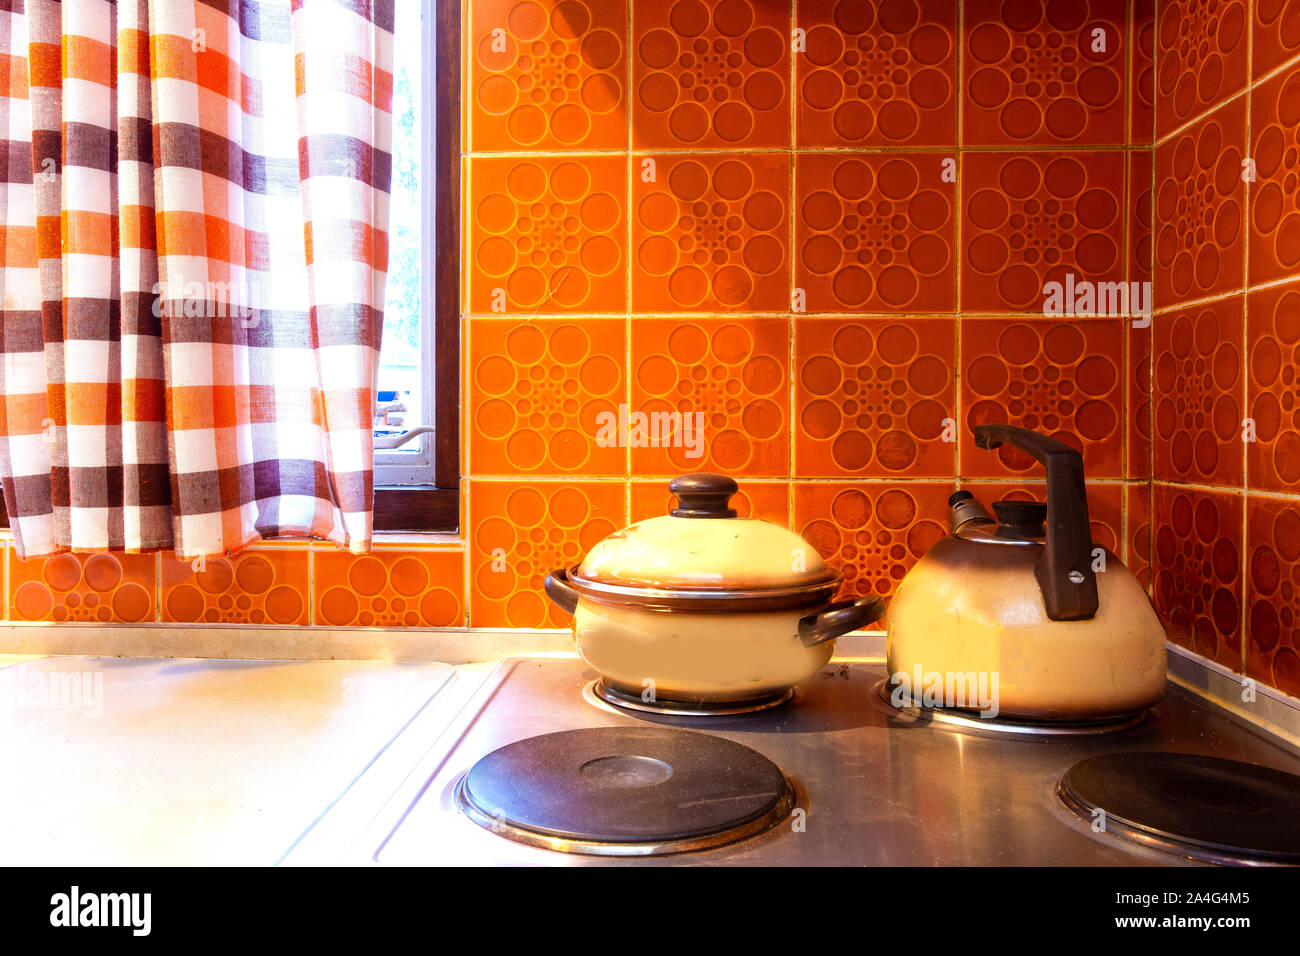 Original vintage kitchen of middle class with orange tiles and old stove with kitchen tools pans Stock Photo